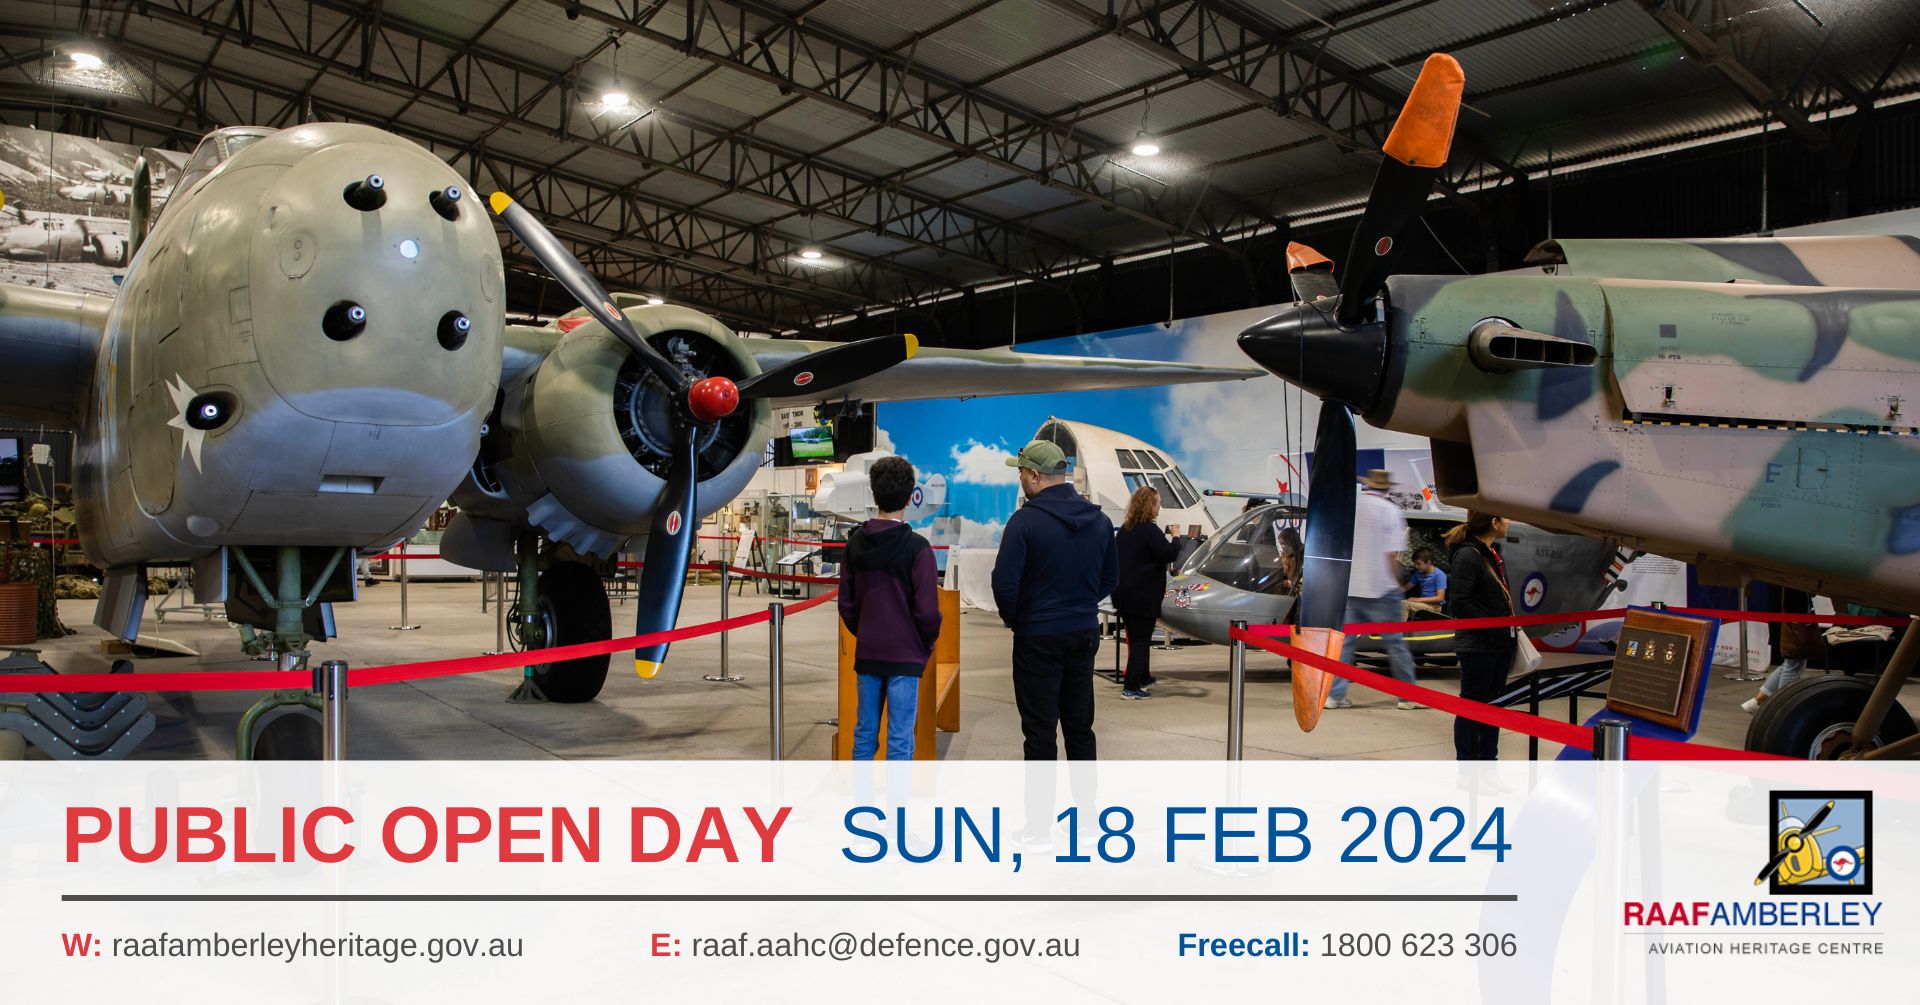 RAAF AAHC - Monthly Sunday Public Open Day - 18 Feb 24